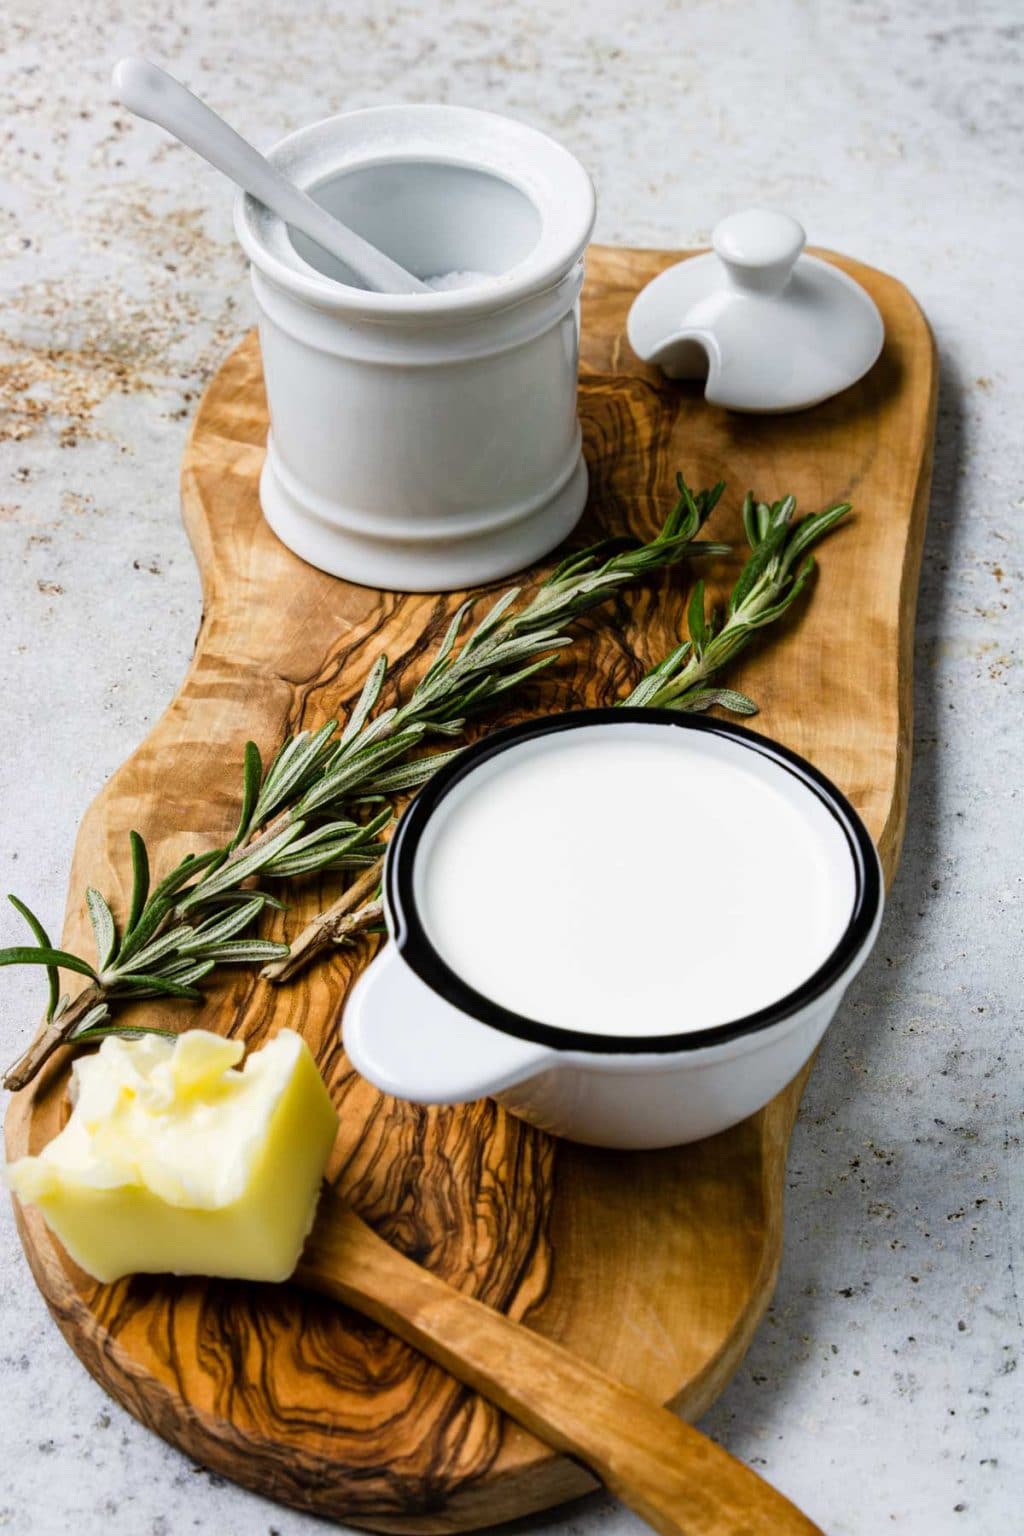 4 of the ingredients in cauliflower puree: Butter, half and half, salt, and rosemary 